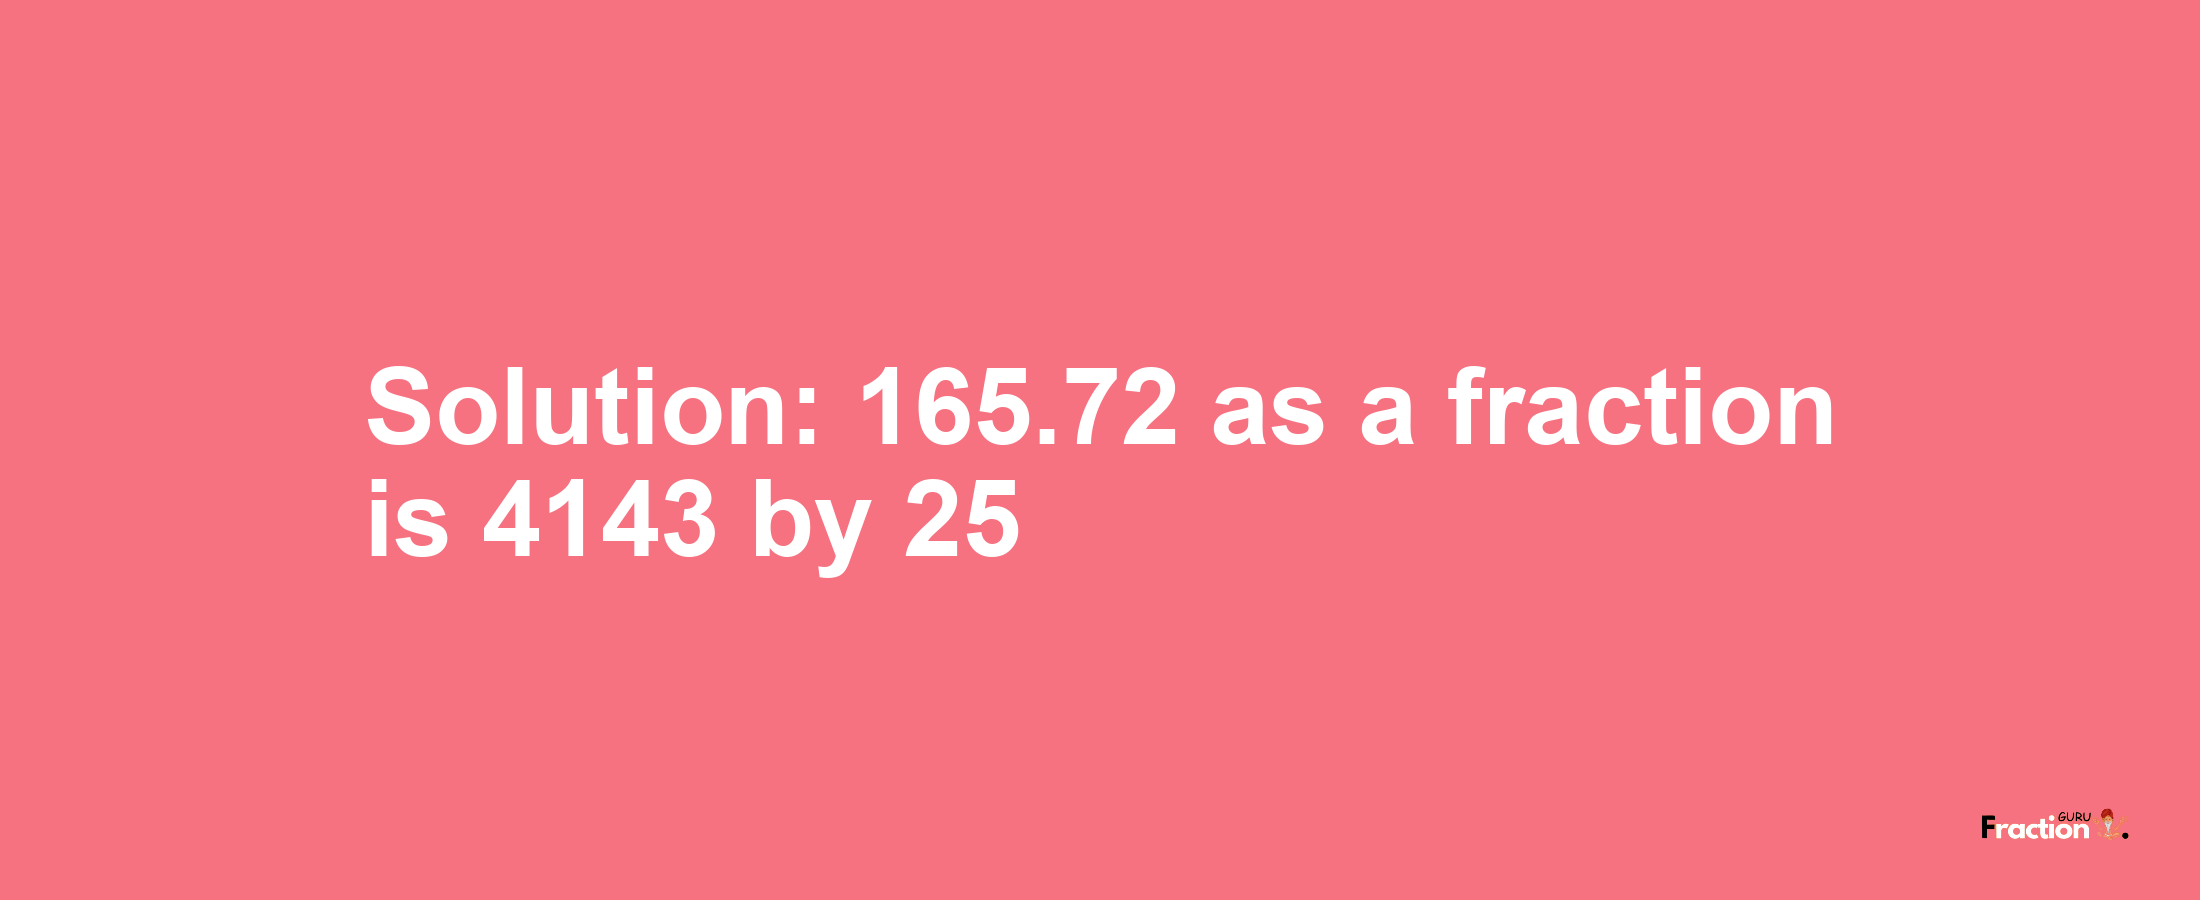 Solution:165.72 as a fraction is 4143/25